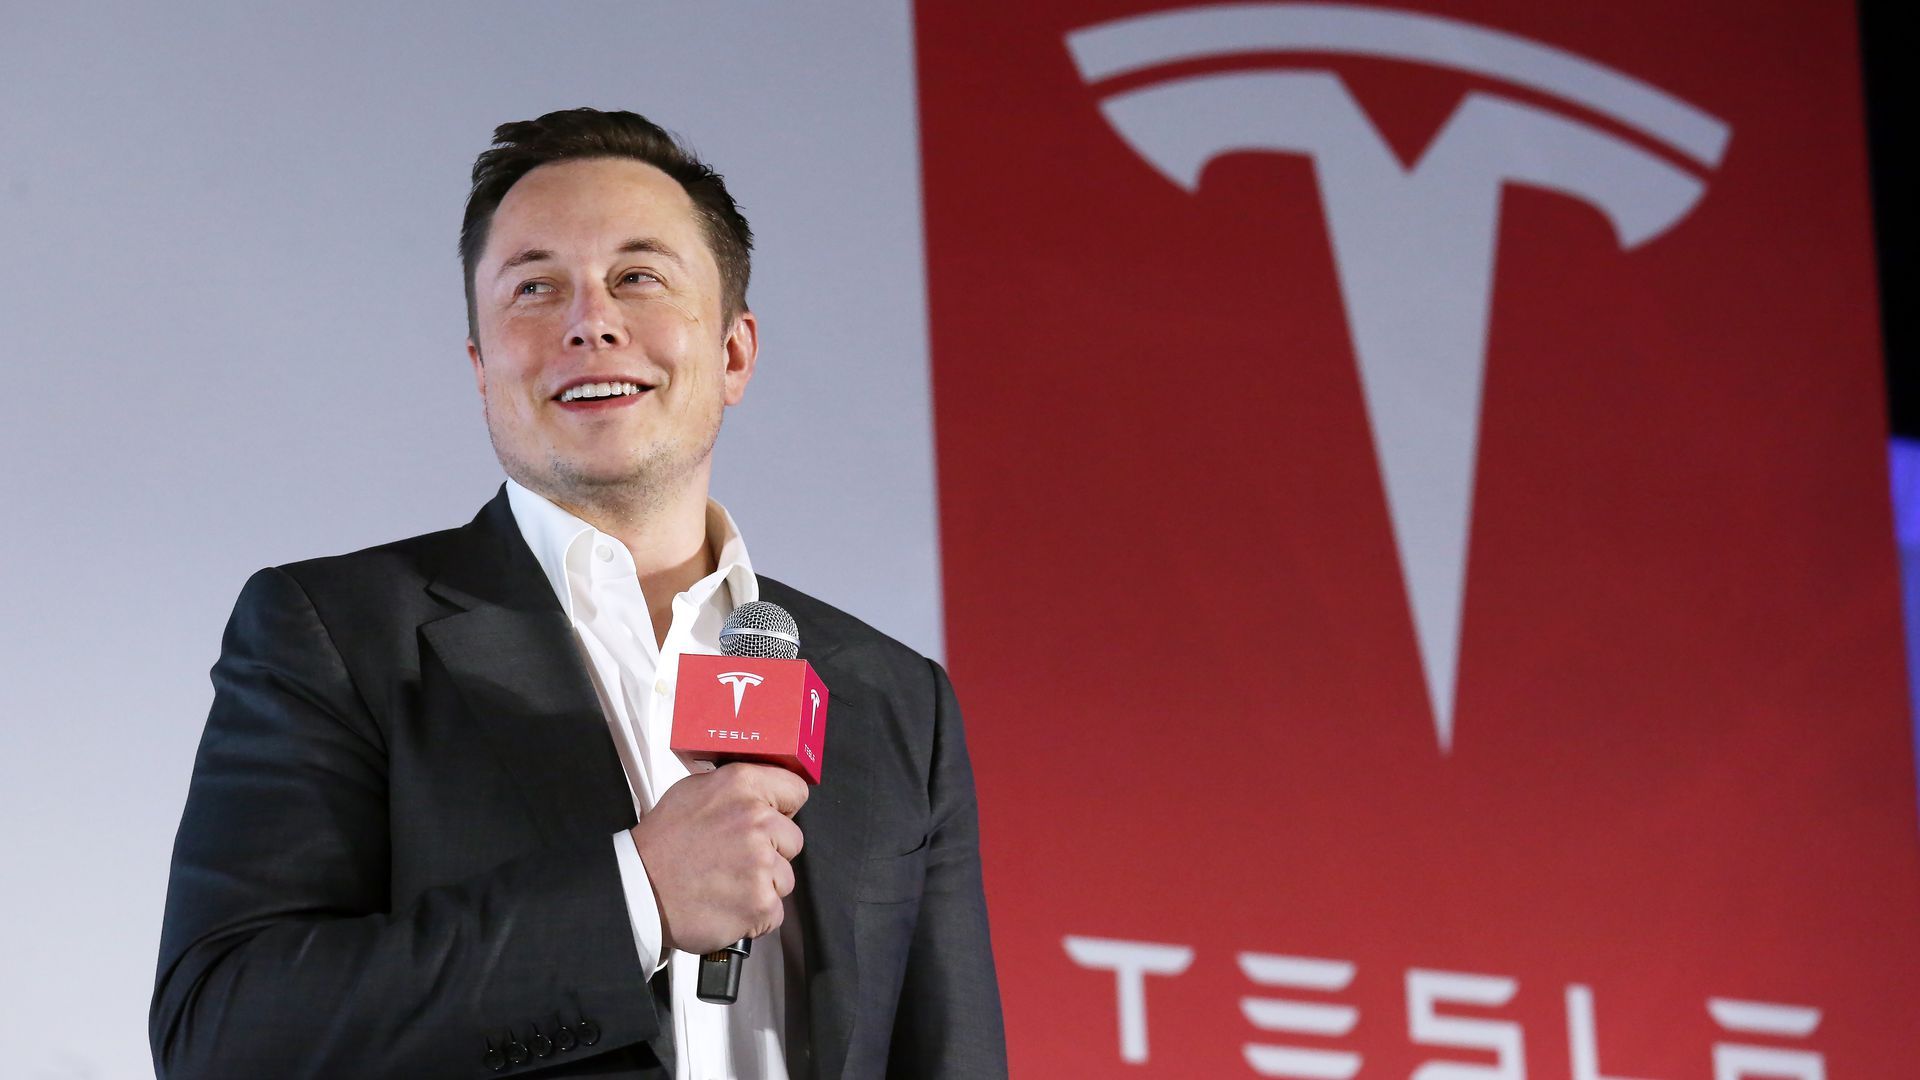 In this image, Elon Musk stands in a suit with a microphone in front of a red sign depicting the Tesla logo.